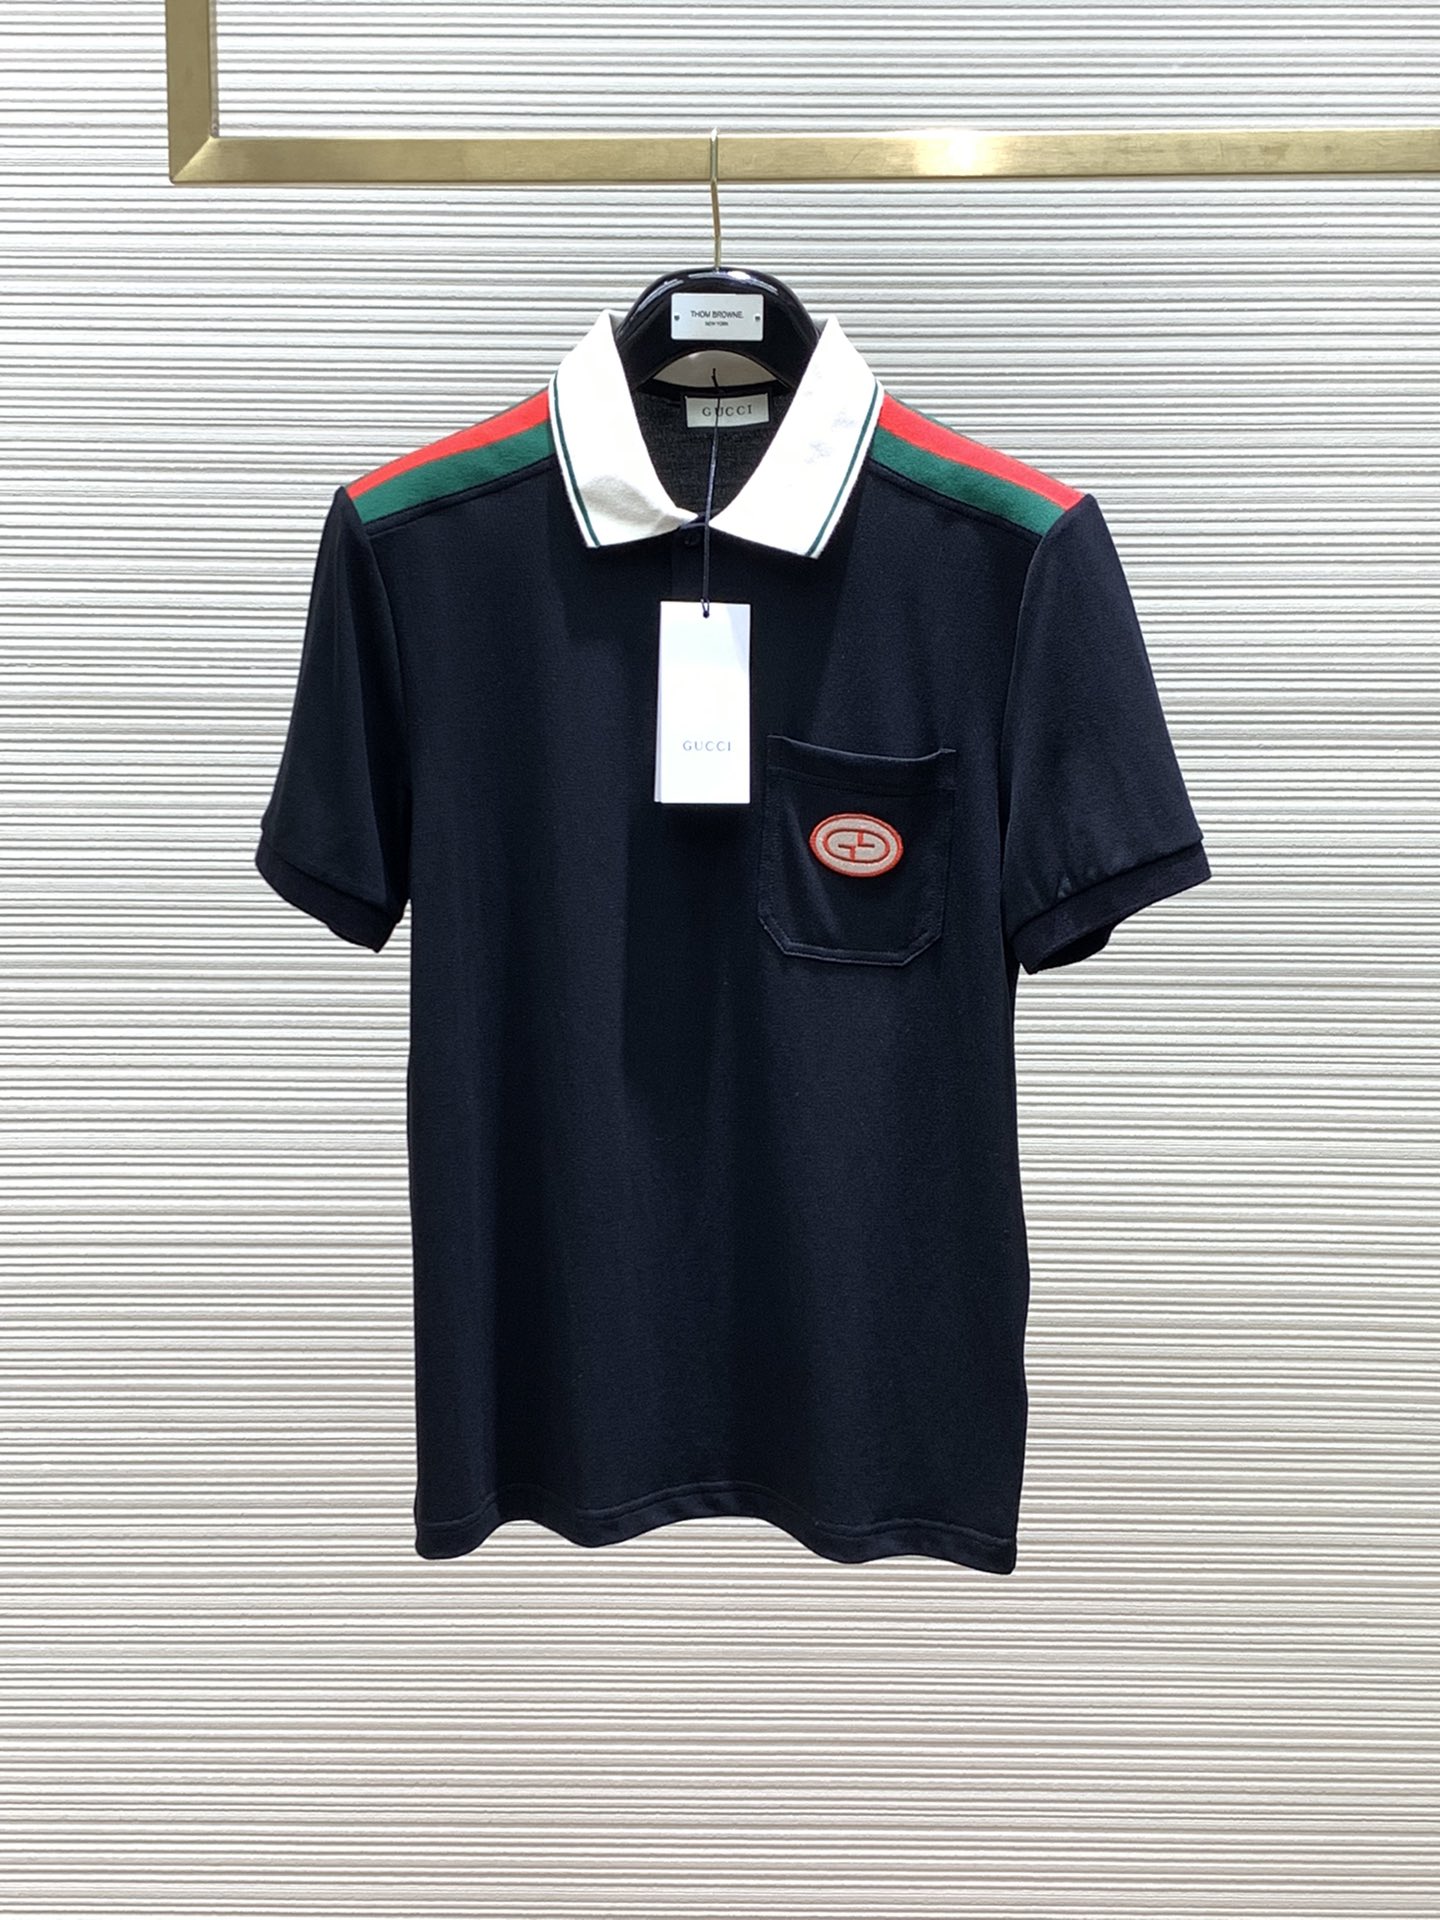 Gucci Clothing Polo T-Shirt Embroidery Summer Collection Fashion Short Sleeve